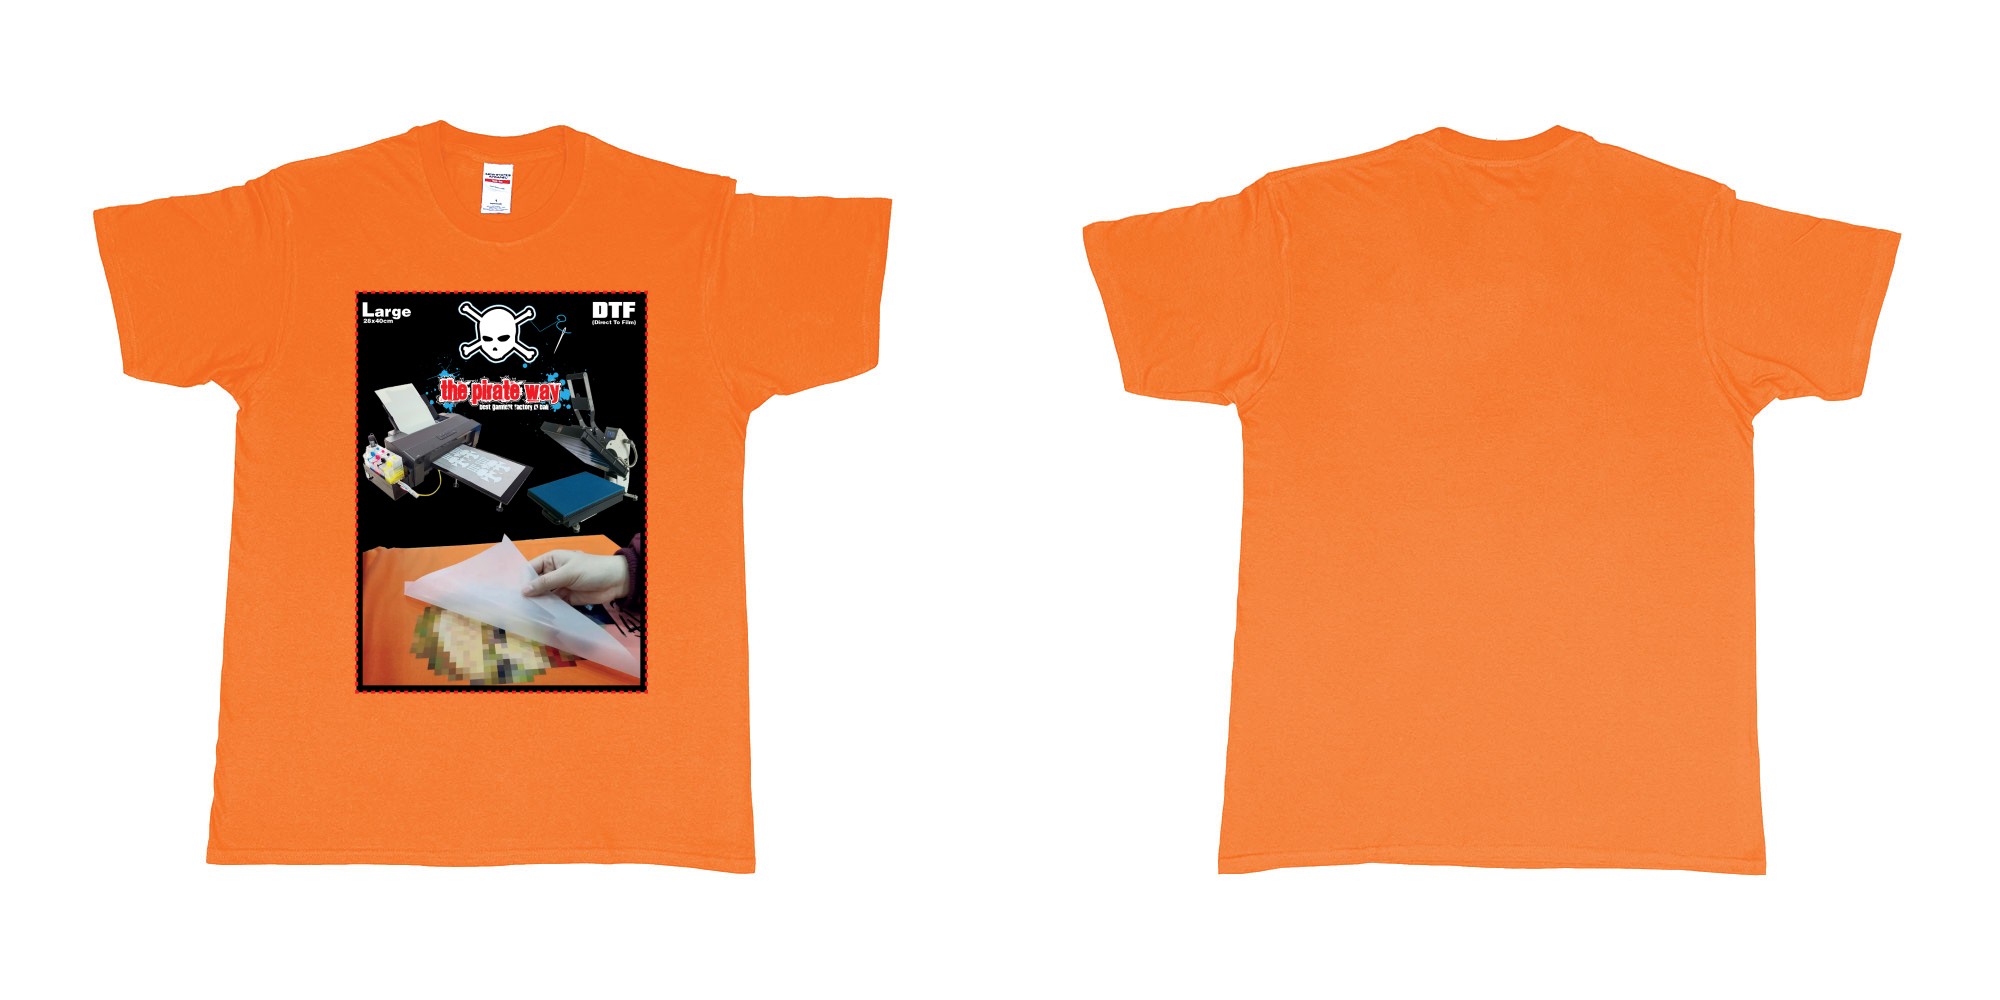 Custom tshirt design dtf printing tshirt large 28x40cm in fabric color orange choice your own text made in Bali by The Pirate Way